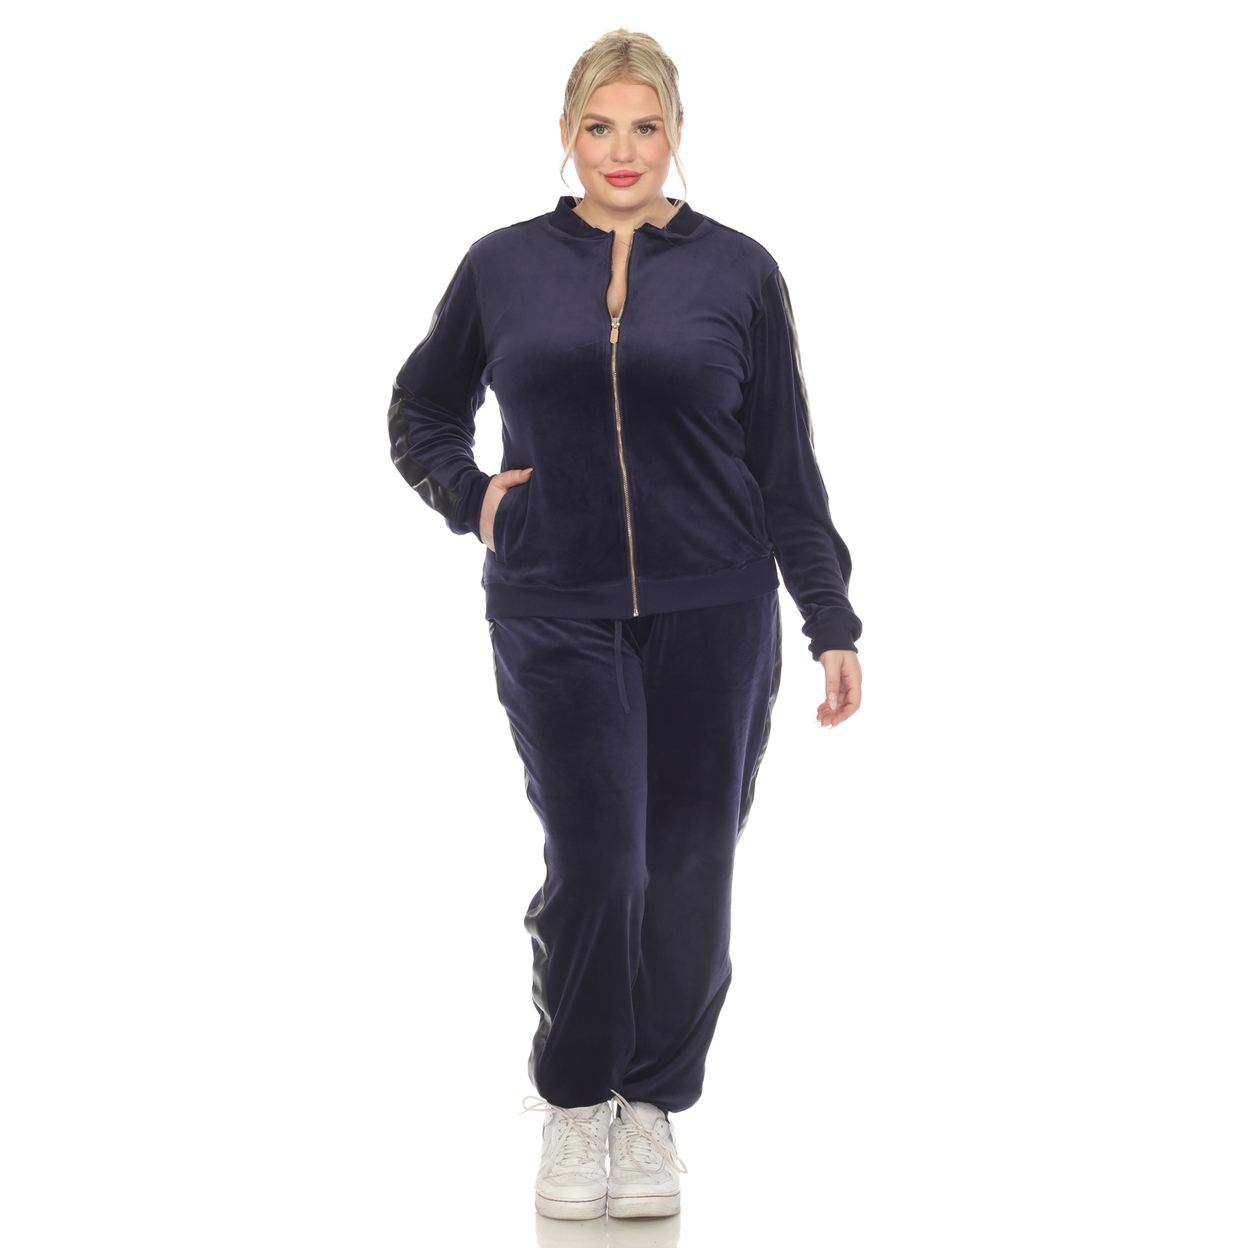 White Mark Women's 2-Piece Velour Tracksuit Set With Faux Leather Stripe - Navy, 3x